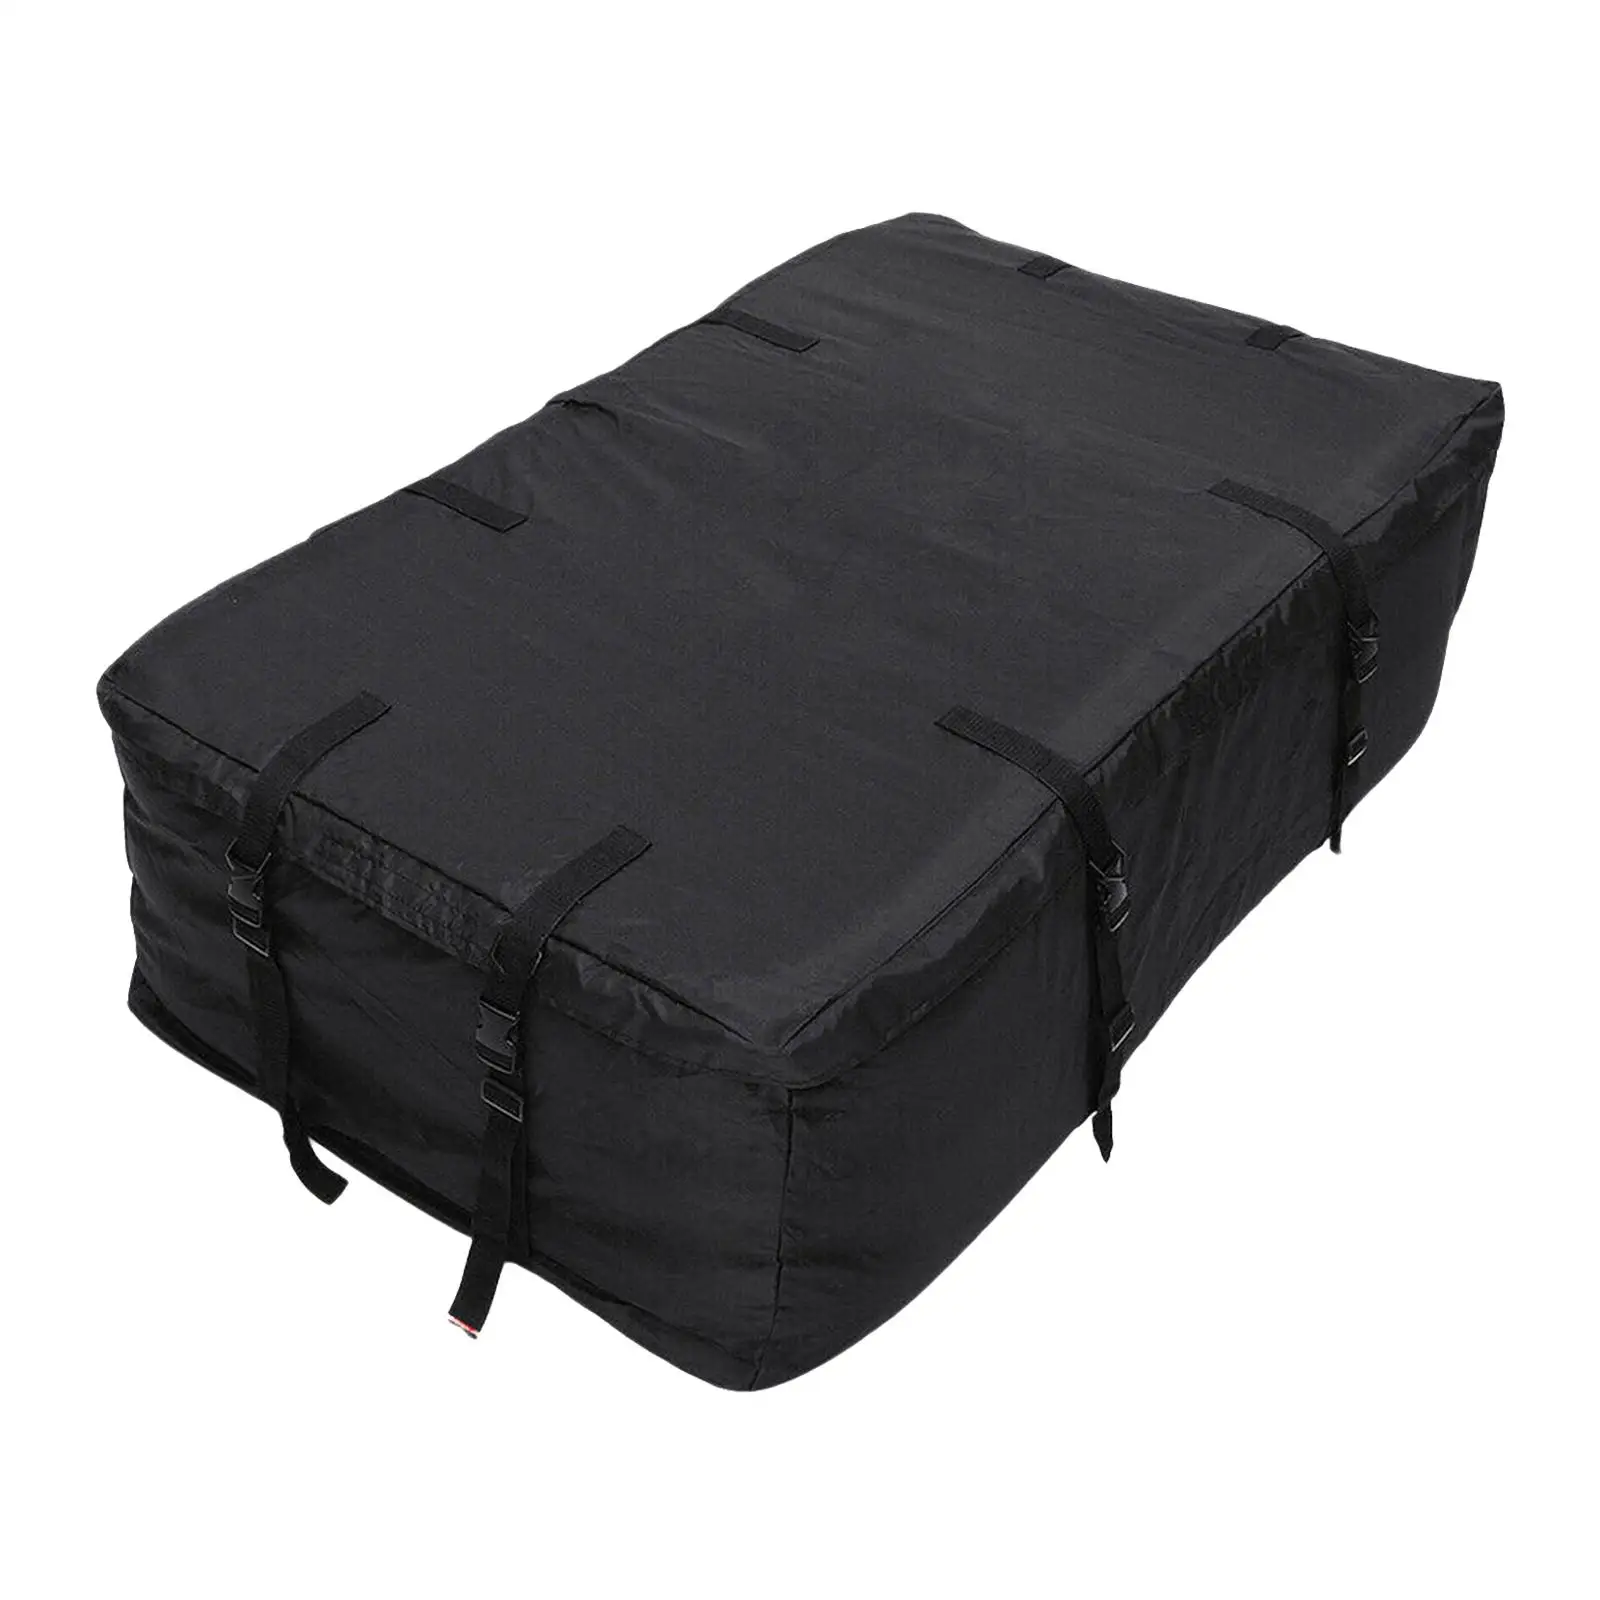 Waterproof Car Roof Car Roof Top Storage Bag 420D Fit for Vehicle Trips